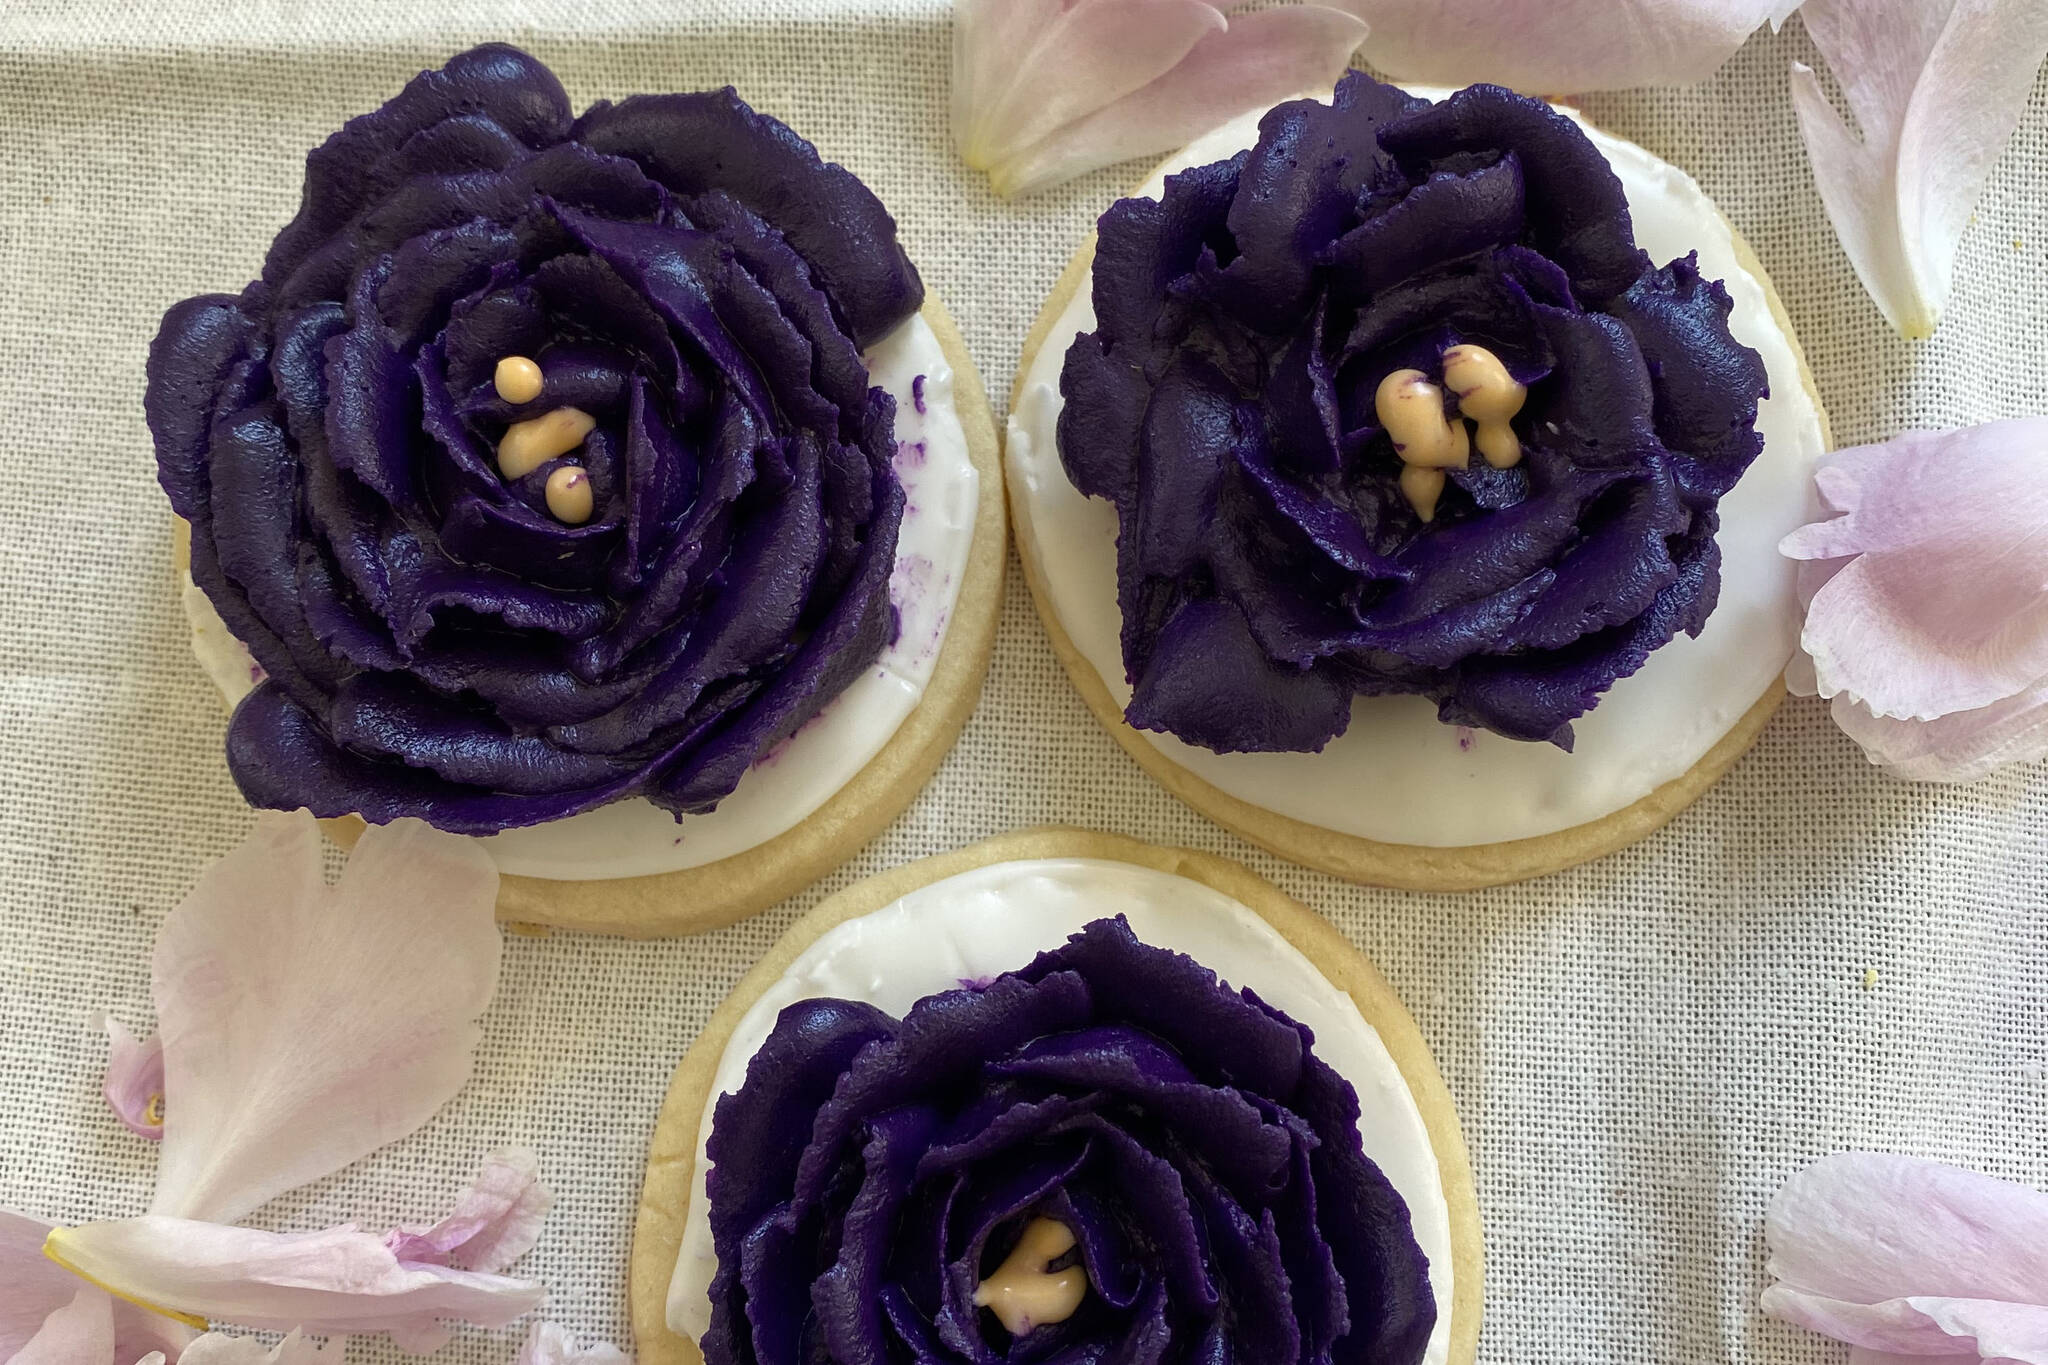 Sugar cookies are decorated with flowers of royal icing. (Photo by Tressa Dale/Peninsula Clarion)